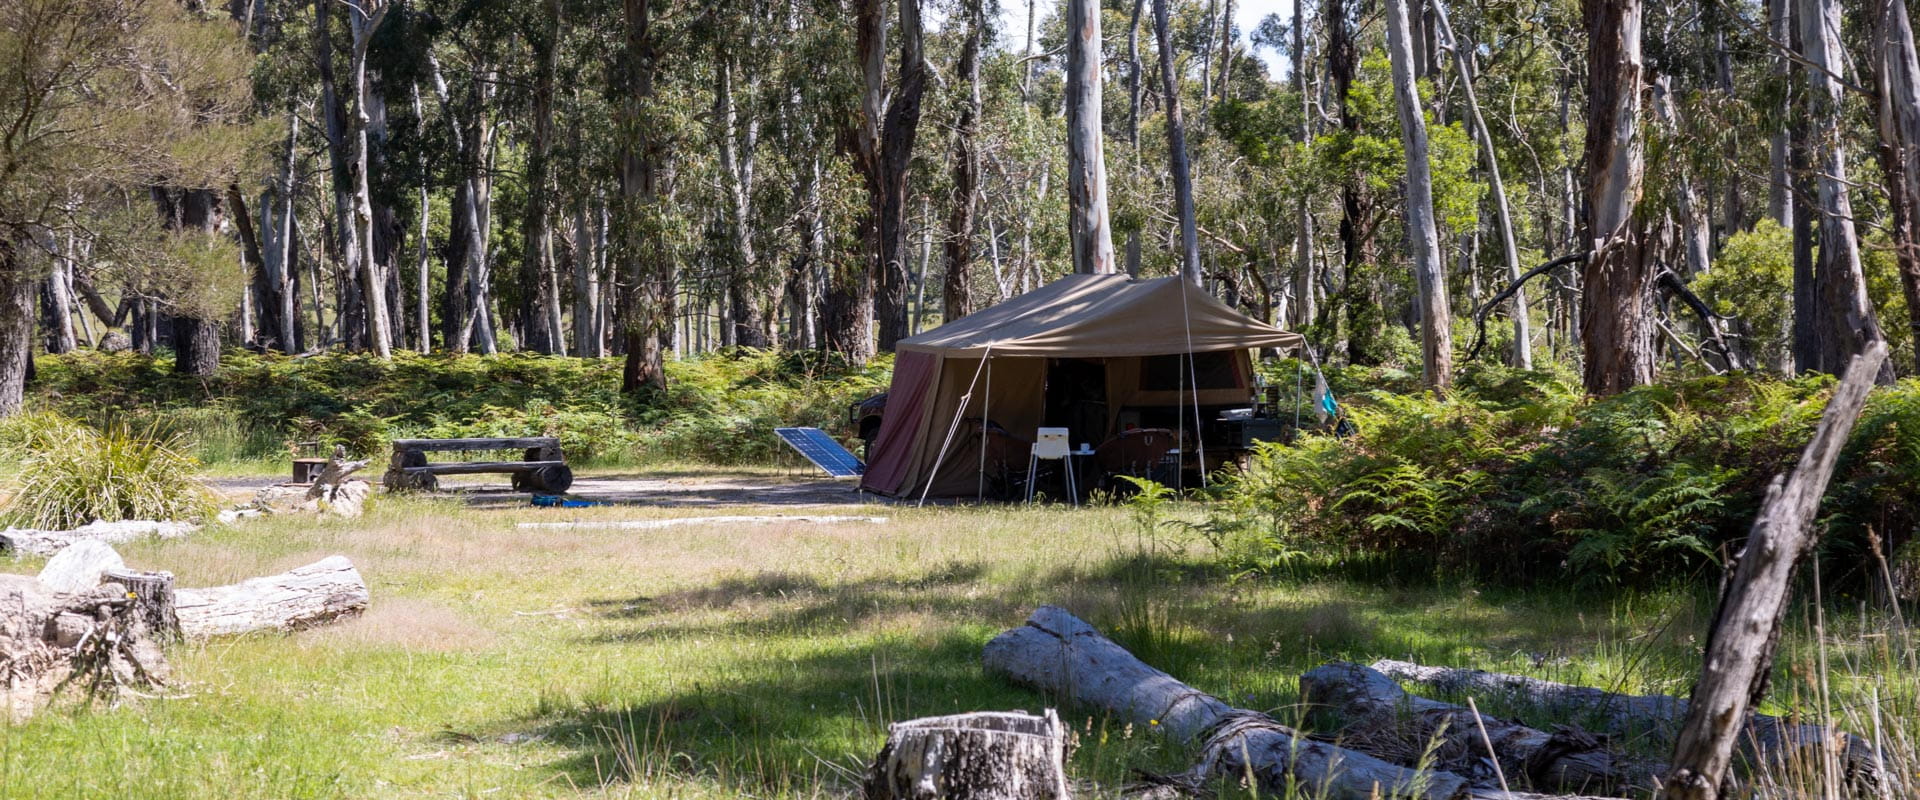 A large camping tent sits under the shade of tall trees surrounding a cleared grassy site with a rustic log picnic table and campfire.